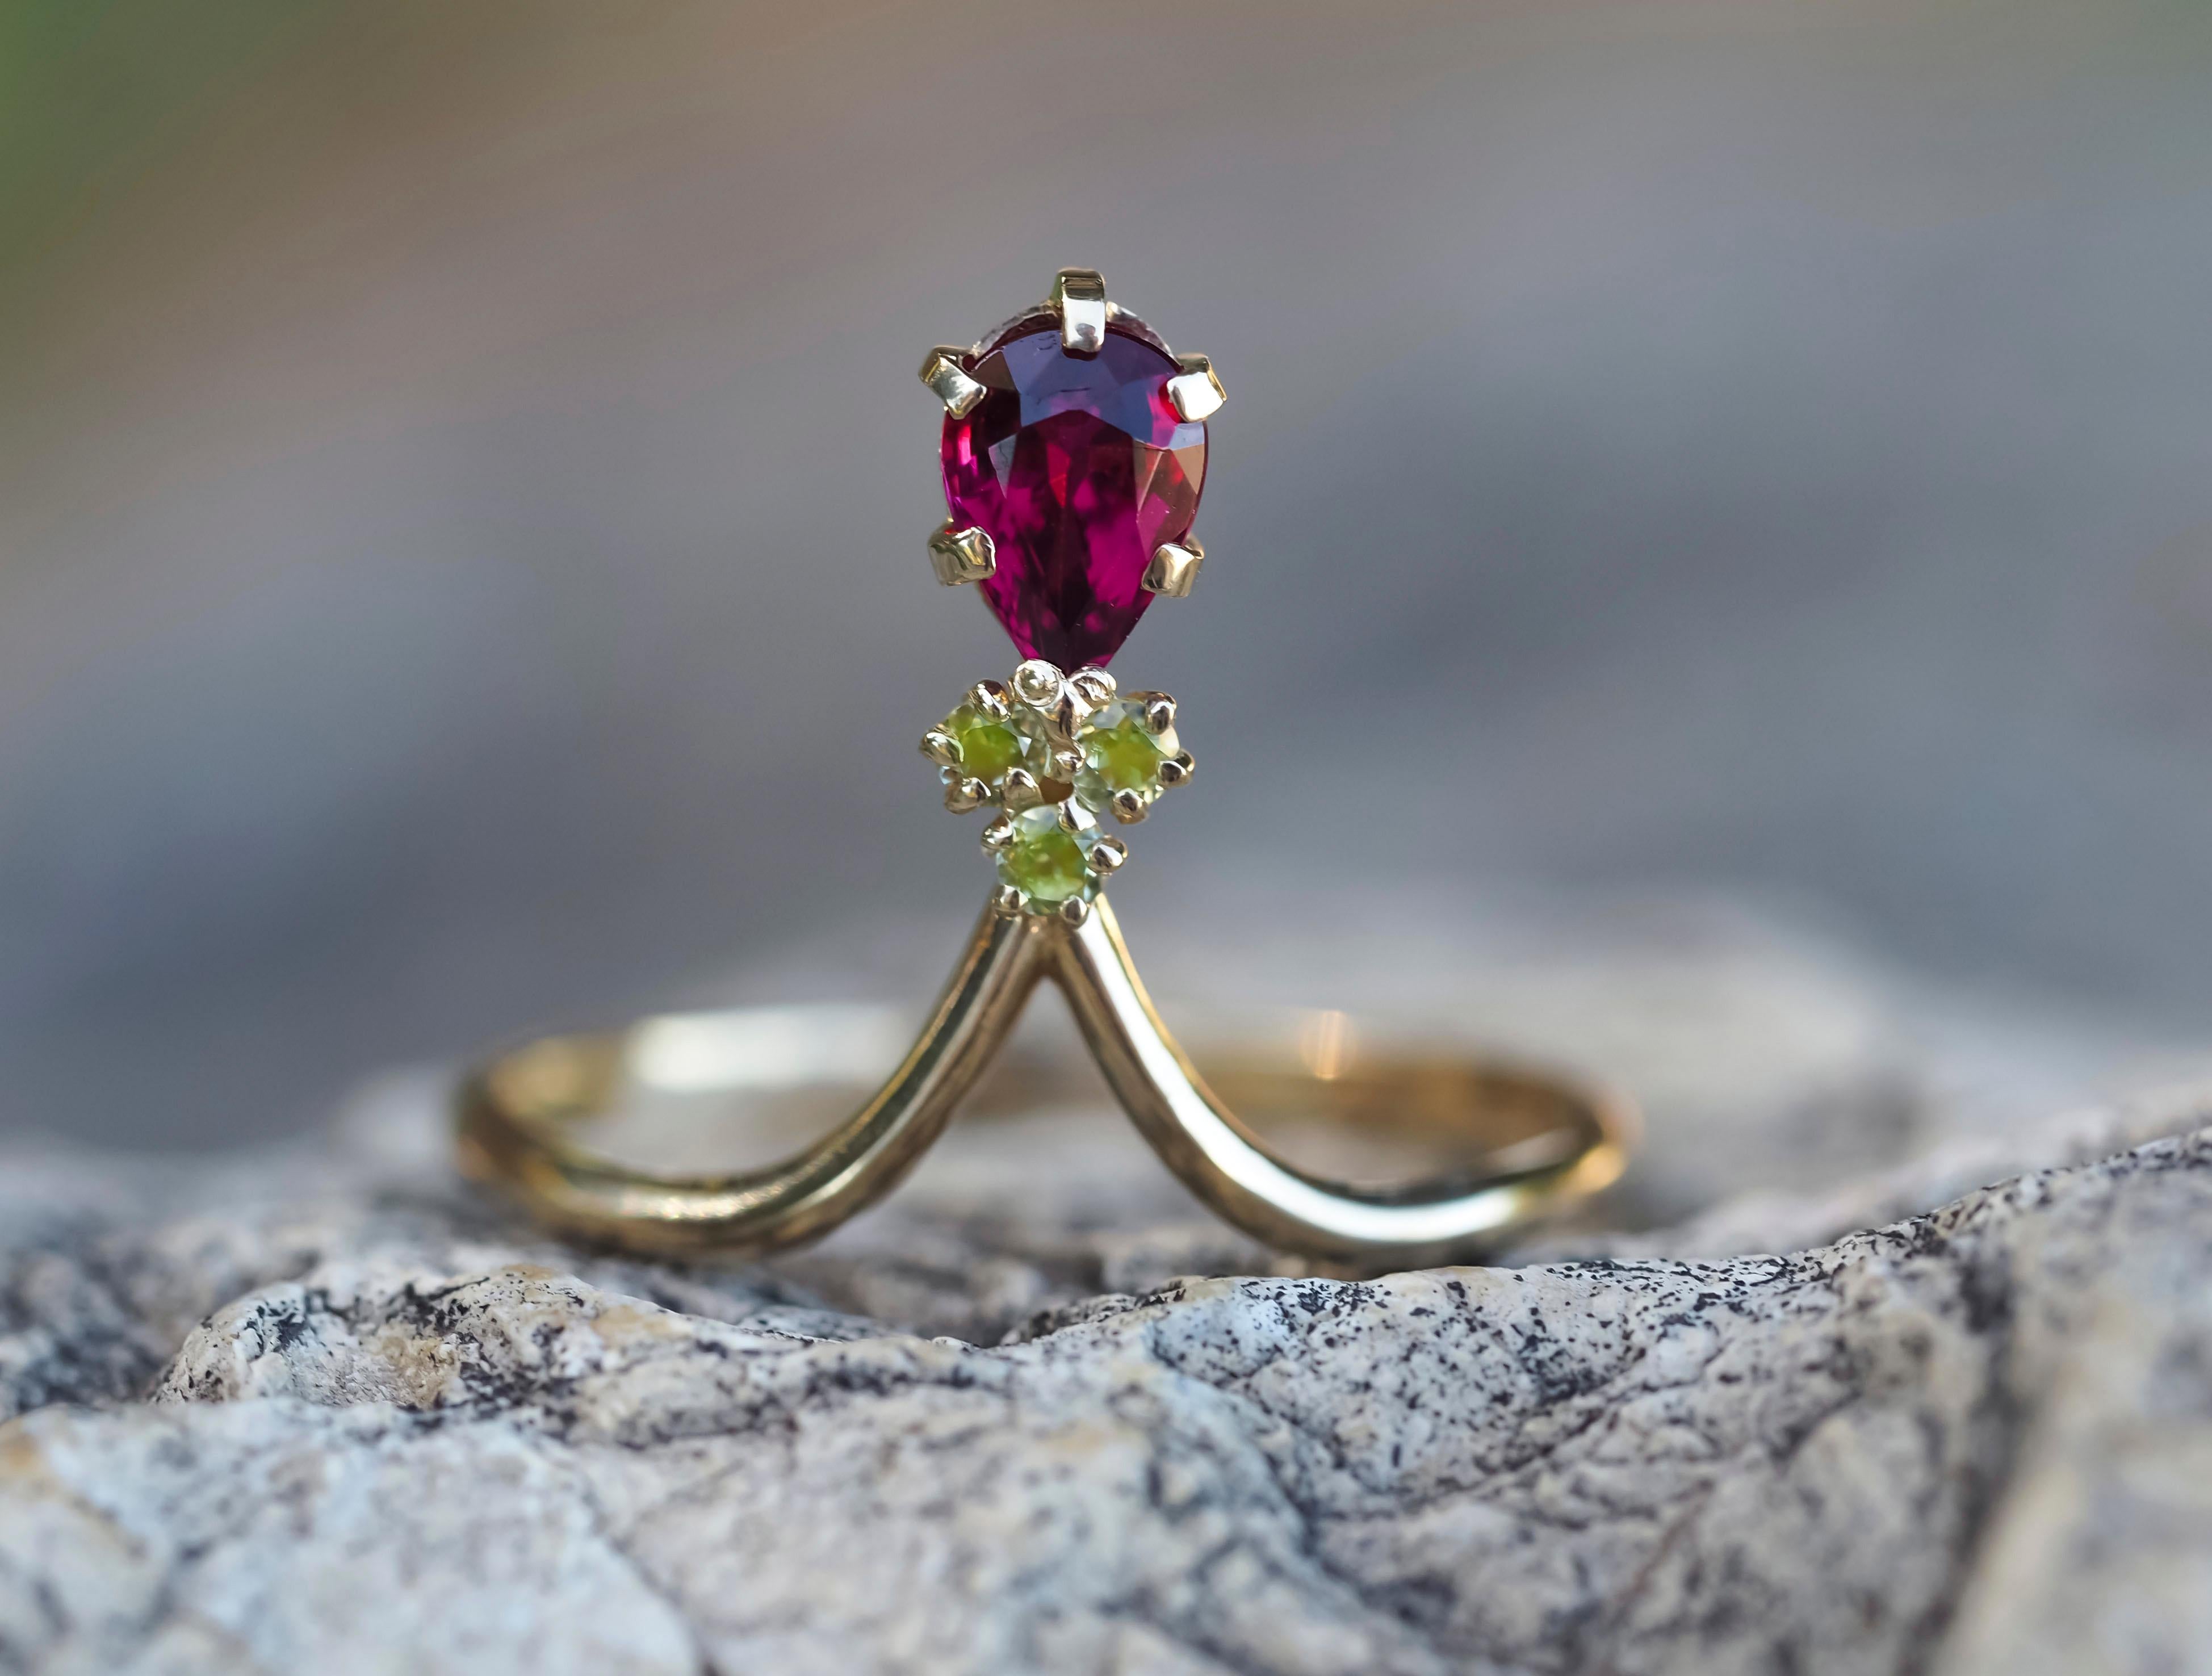 Pear Tourmaline 14k gold ring. 
Rubellite Tourmaline Ring. Vintage tourmaline ring. October birthstone ring. Art-deco ring. Minimalist ring.

Metal: 14k gold
Weight 1.6 gr. depends from size.

Gemstones (all are tested by proffesional